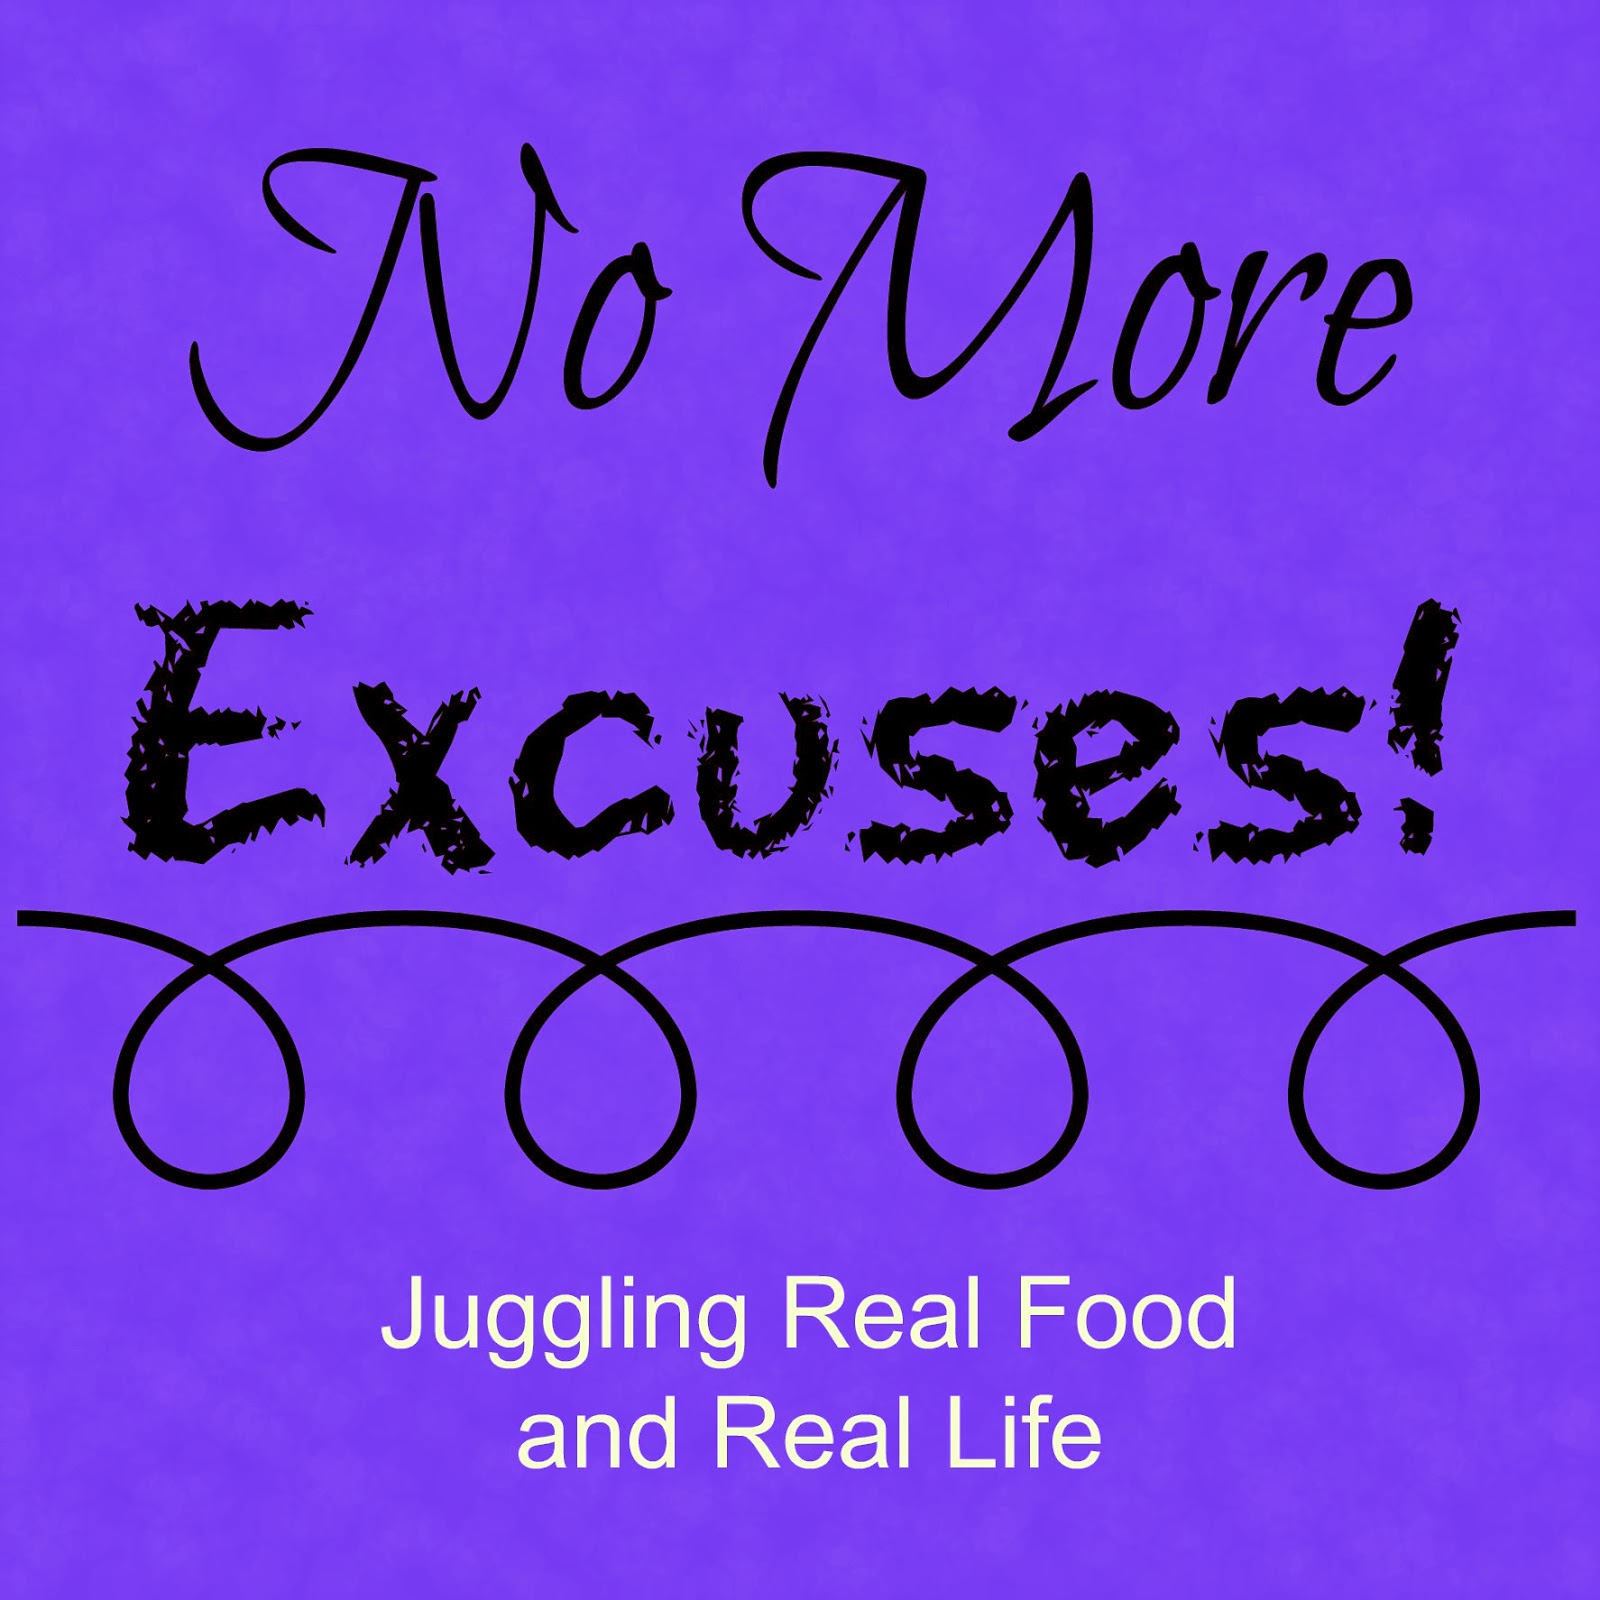 Real Food Excuses ~ Confusion